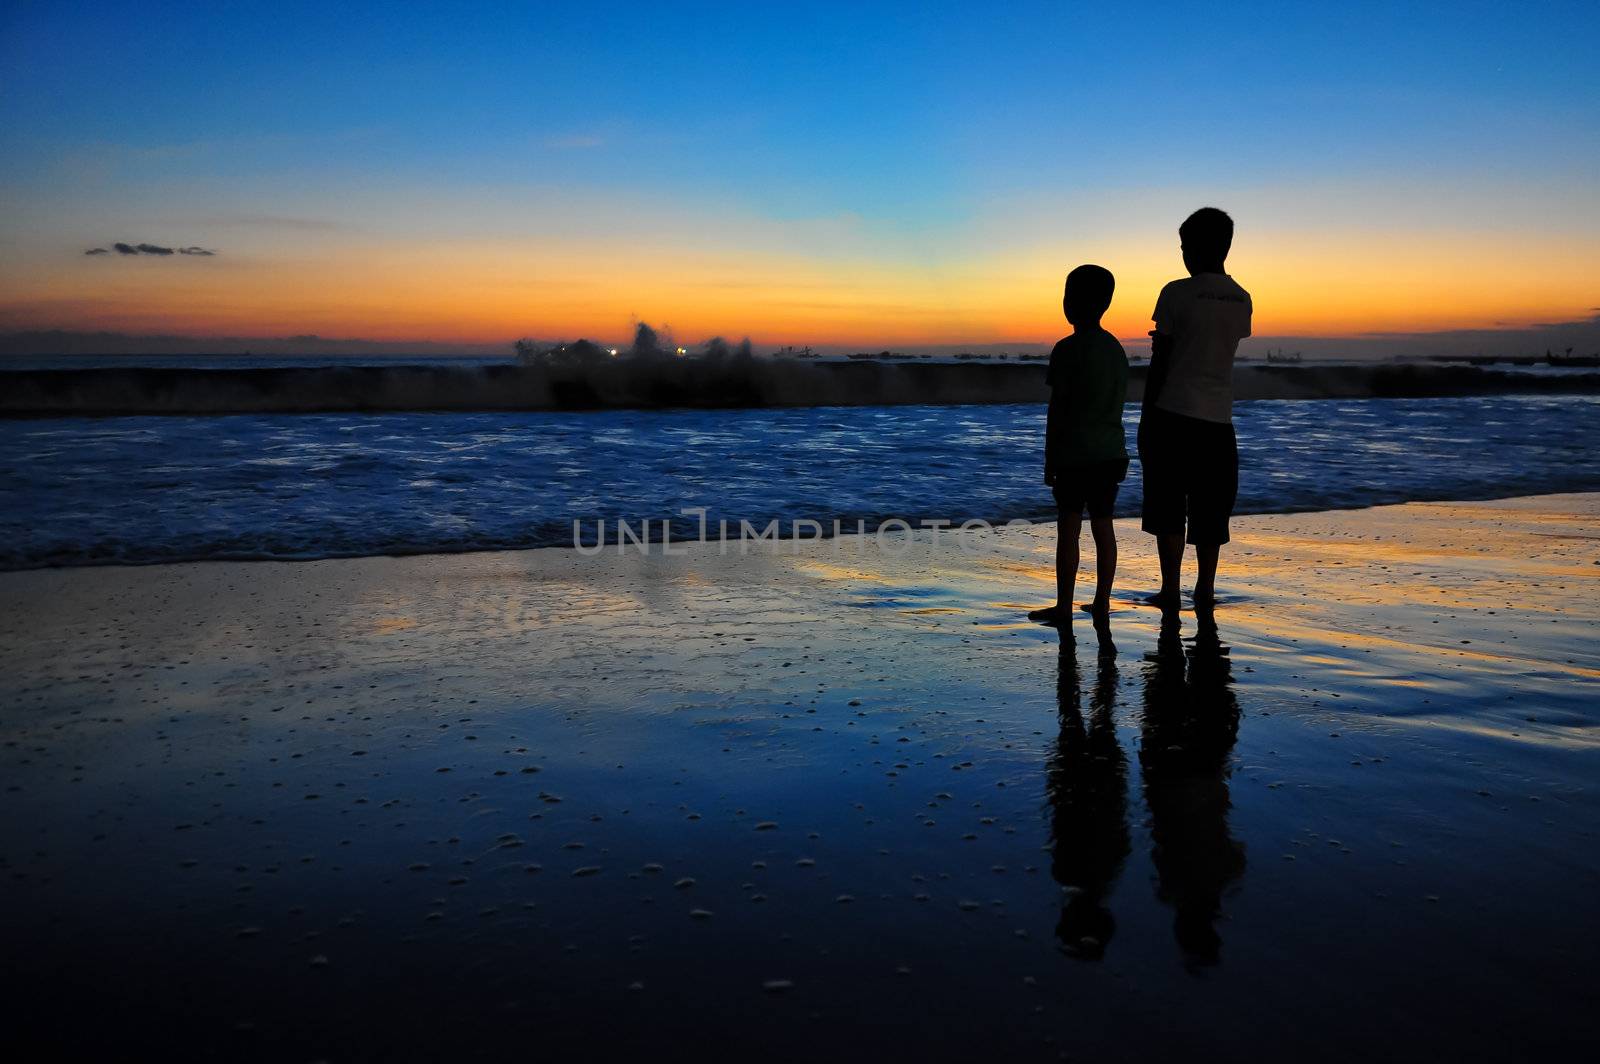 Silhouette of two young boys at ocean sunset by martinm303